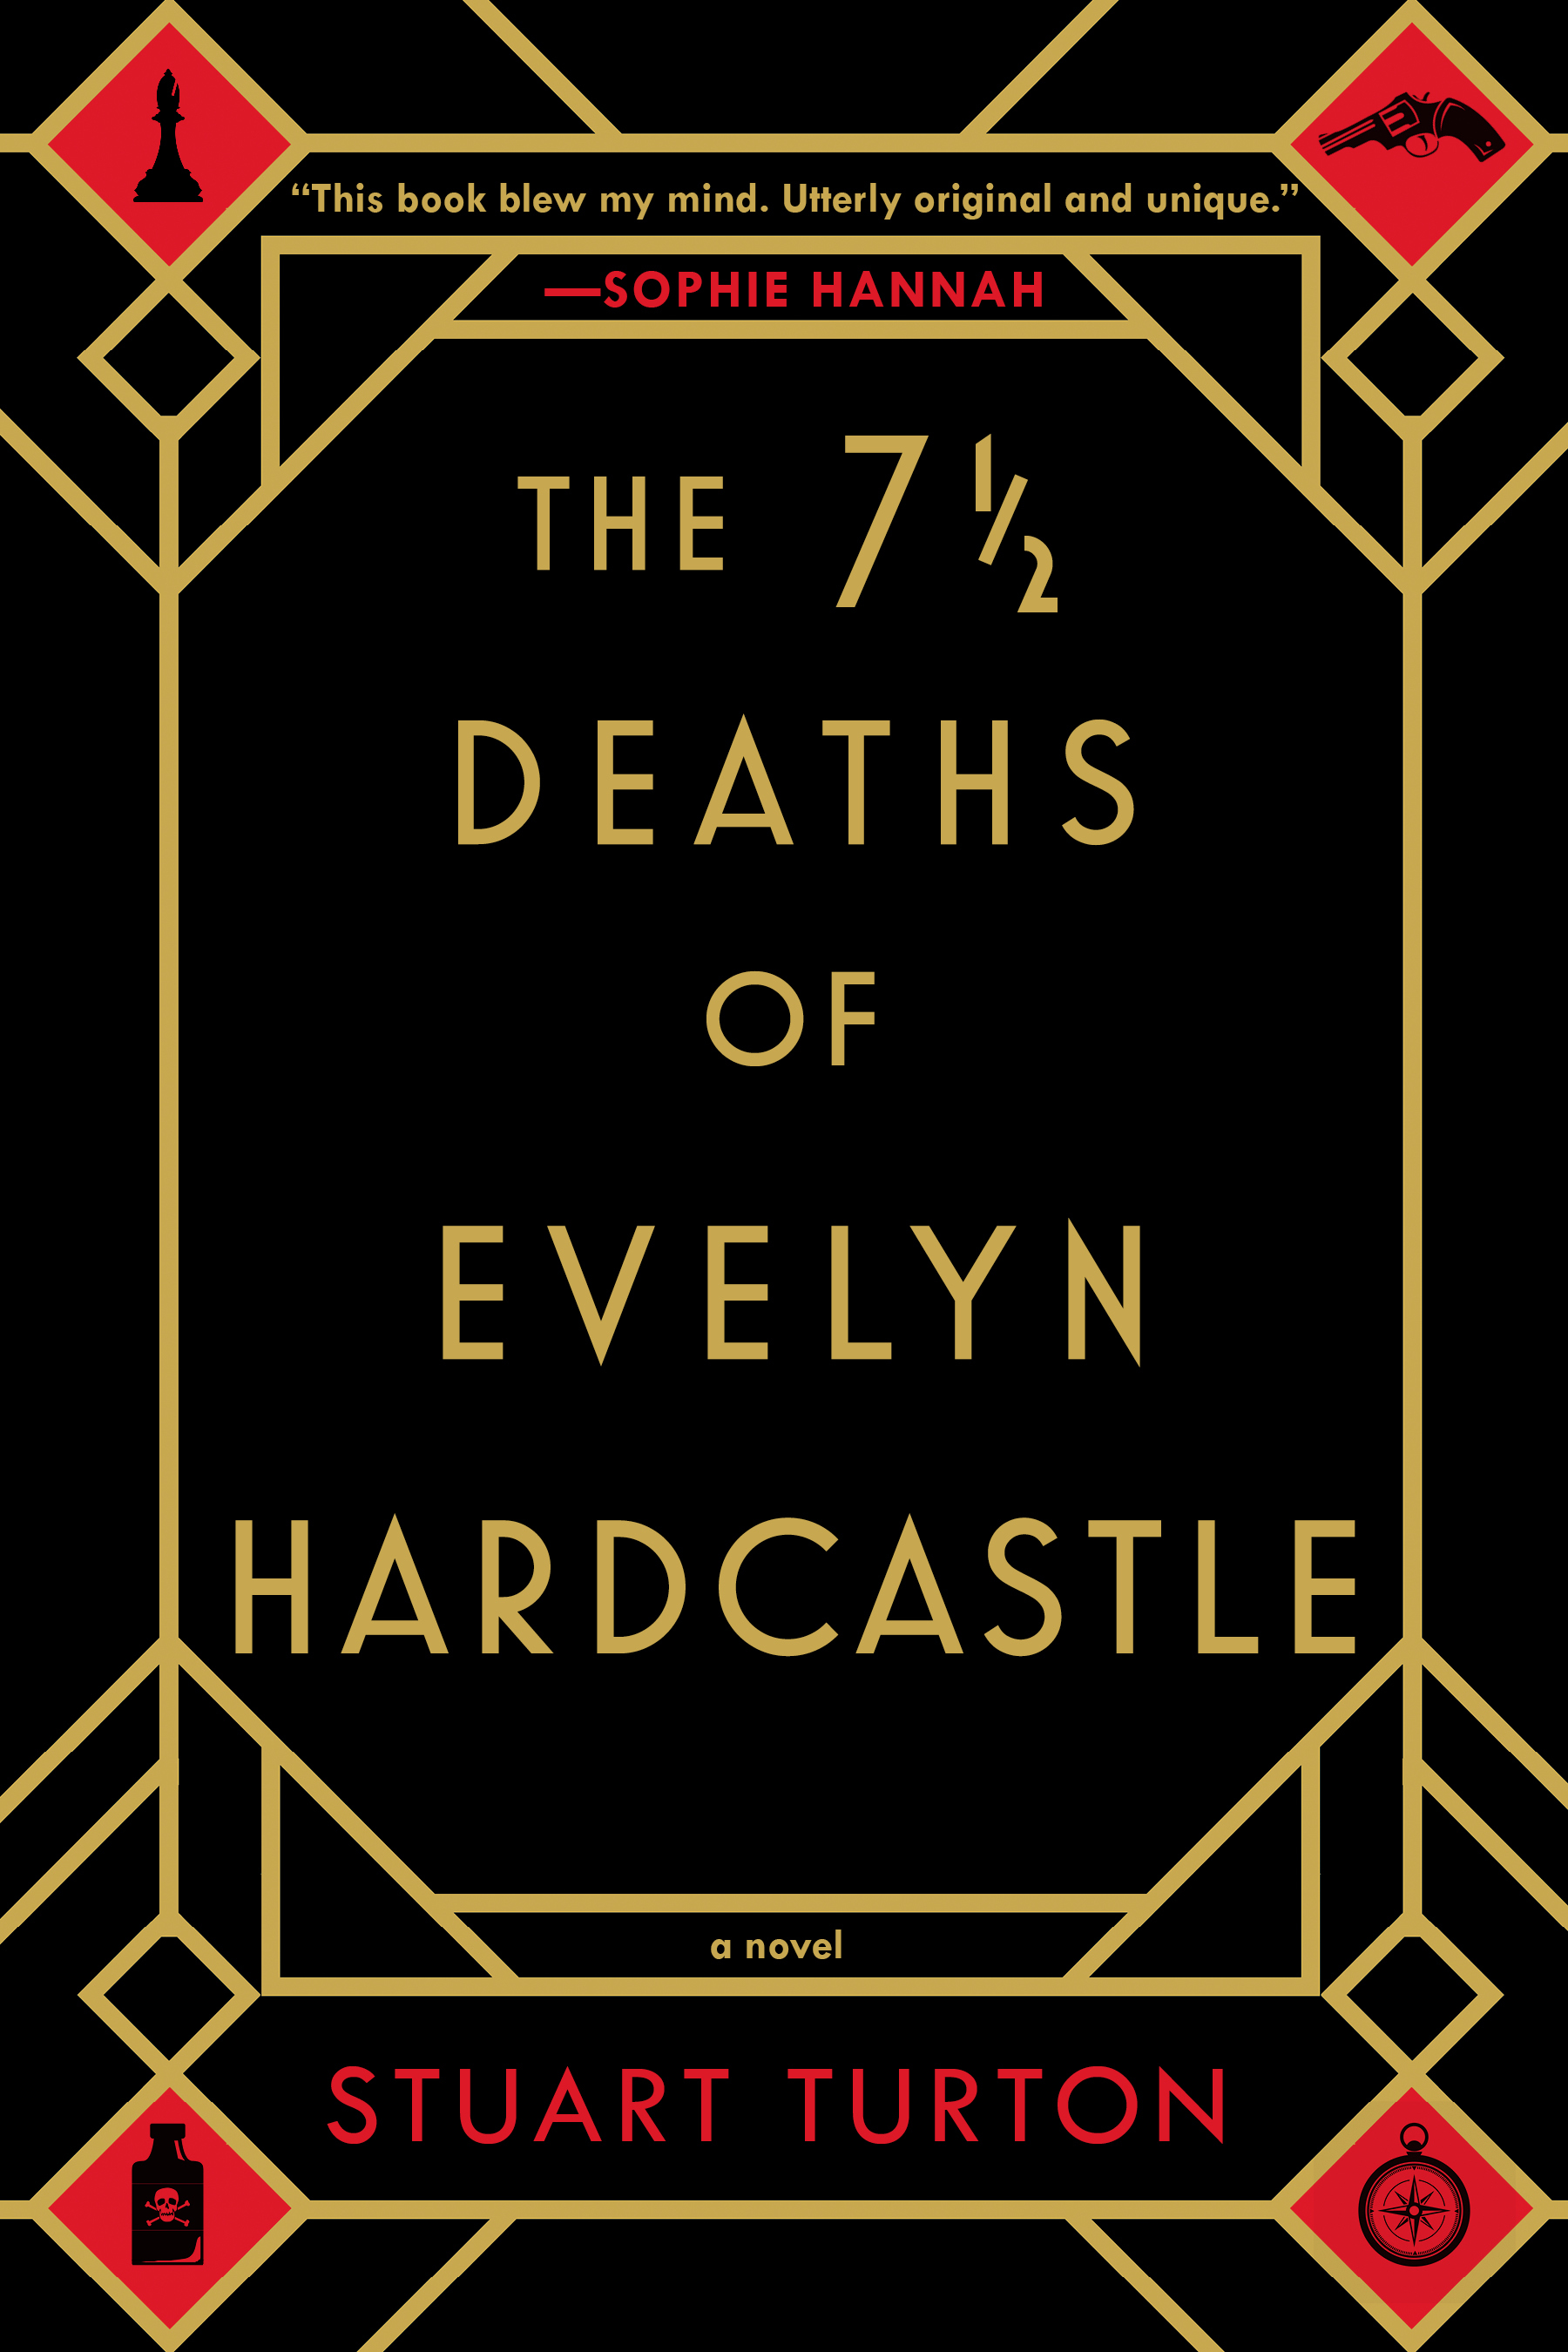 The Seven Deaths of Evelyn Hardcastle by Stuart Turton